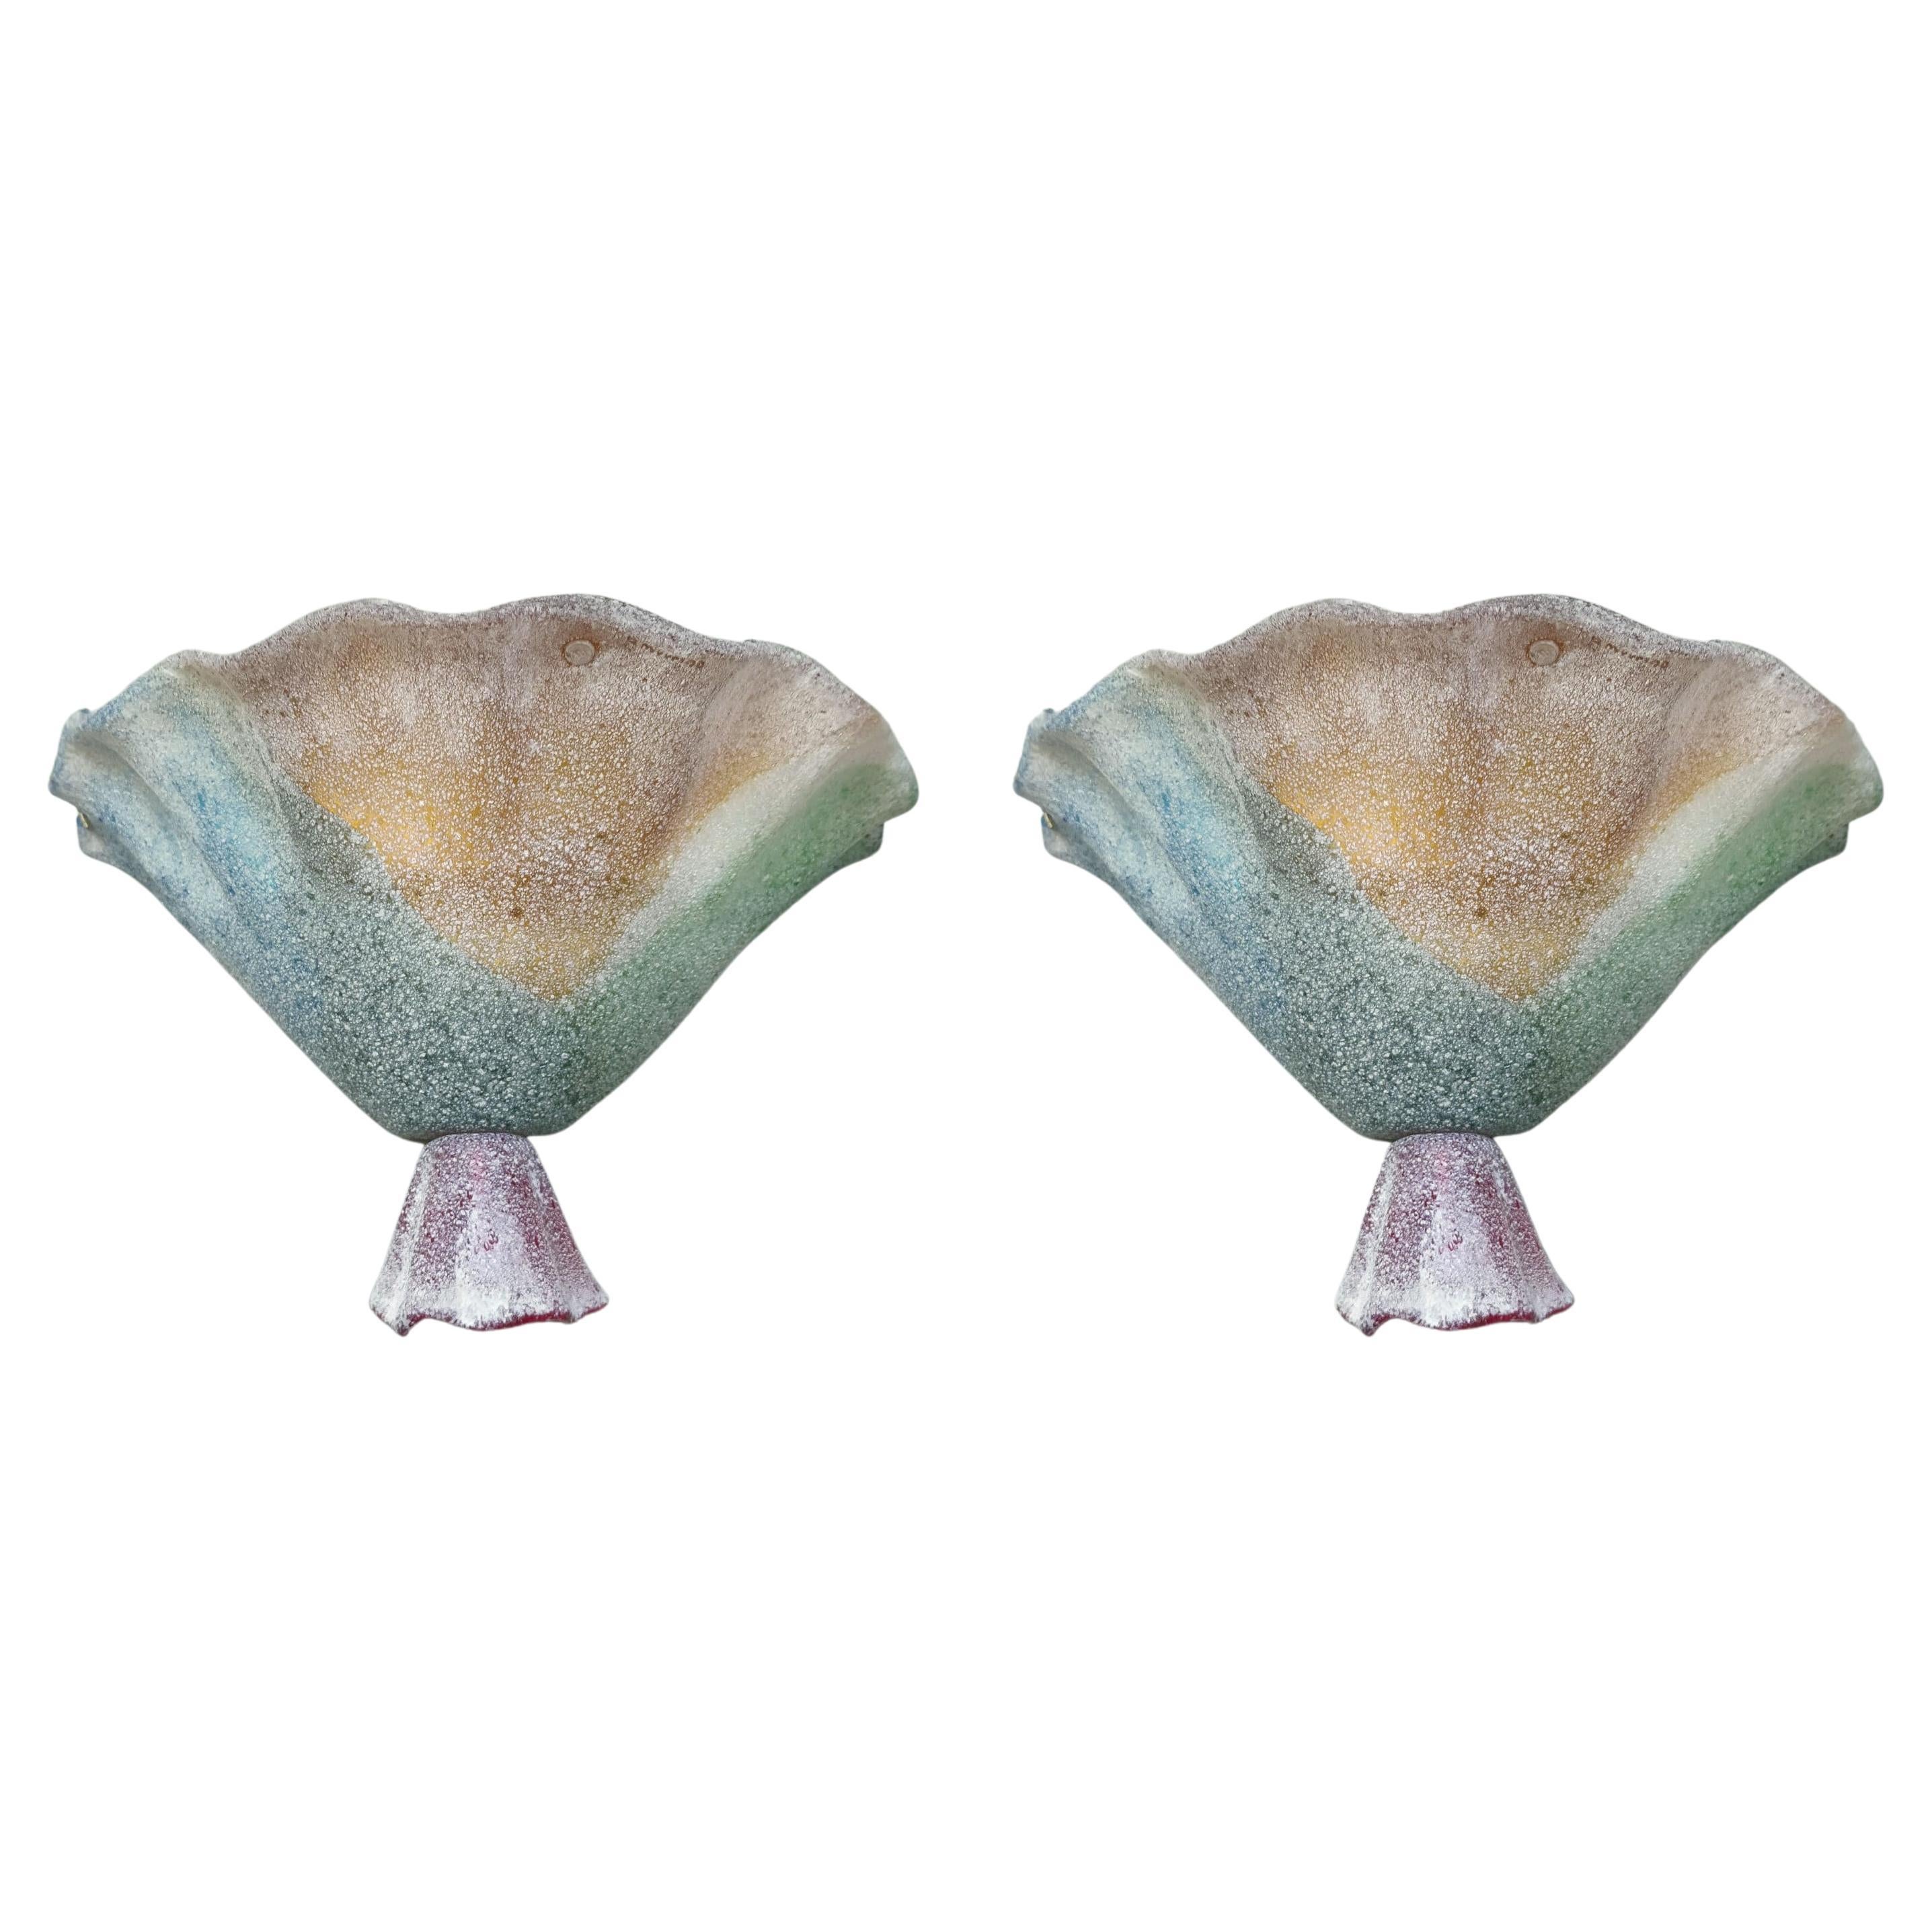 Pair of Rainbow Sconces by La Murrina, 2 Pairs Available